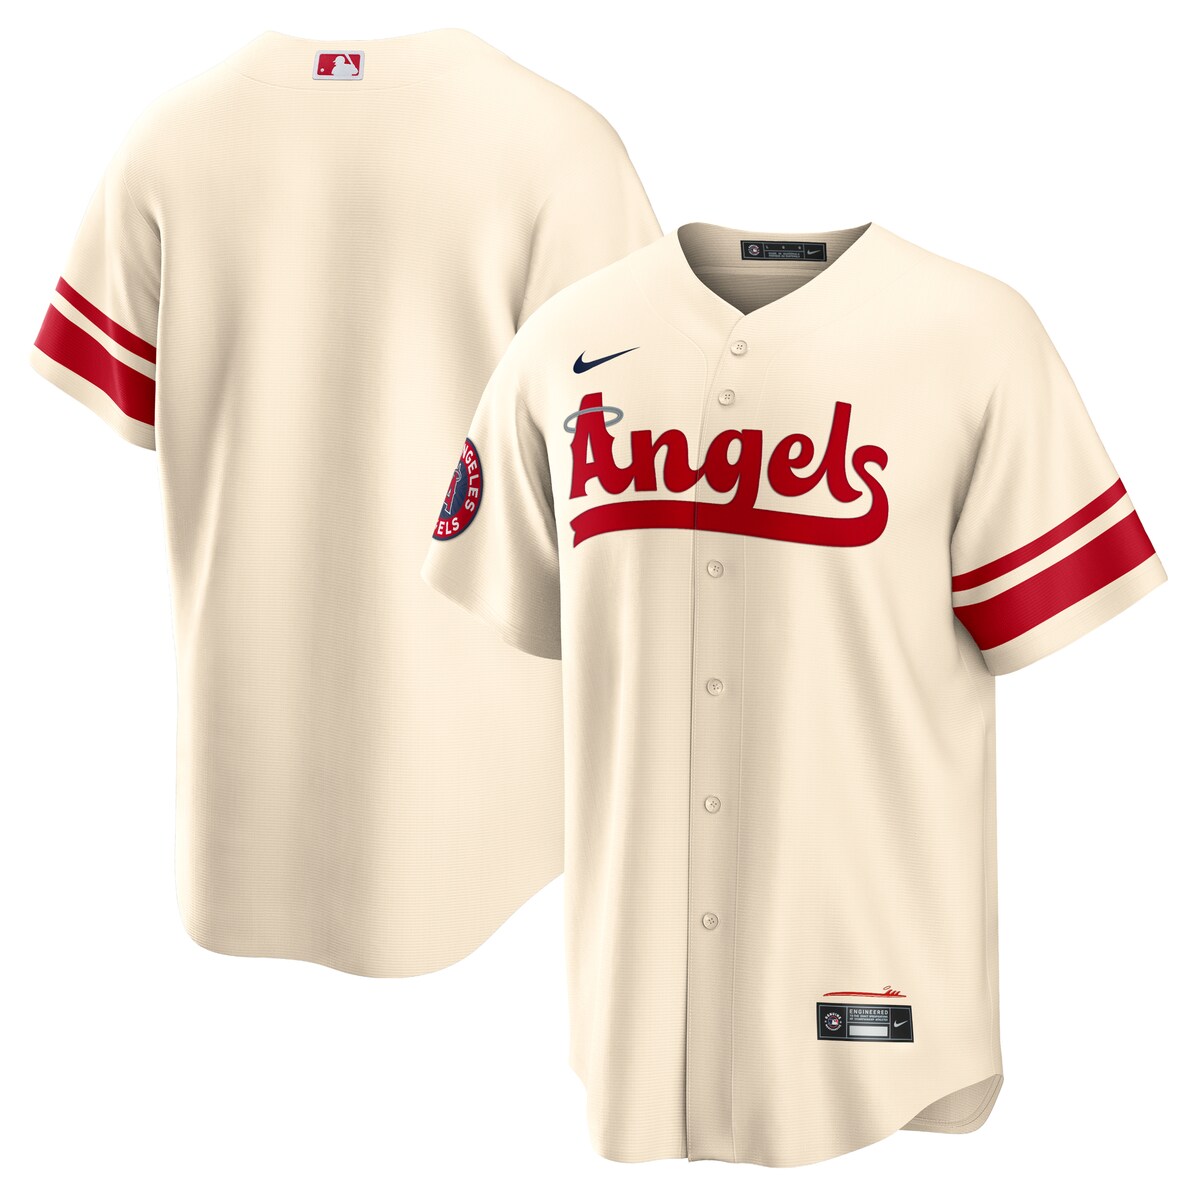 Add a truly unique piece to your Los Angeles Angels collection of gear with this new 2022 City Connect Replica Team Jersey. This special Nike piece is perfect for you, whether you were born at the beach or have fallen in love with the laid back surf culture that Southern California provides. The design of this gear is inspired by immaculate Huntington Beach vibes and the unwavering free and easy mood of Angels fans. Snag some of this fresh new gear to stand out at the game or in the sand on the weekend, and make sure everyone knows where you're from and who you root for.Heat-sealed jock tagMachine wash gentle or dry clean. Tumble dry low, hang dry preferred.Replica JerseyOfficially licensedImportedMaterial: 100% PolyesterRounded hemBrand: NikeHeat-sealed transfer appliqueFull-button frontMLB Batterman applique on center back neck